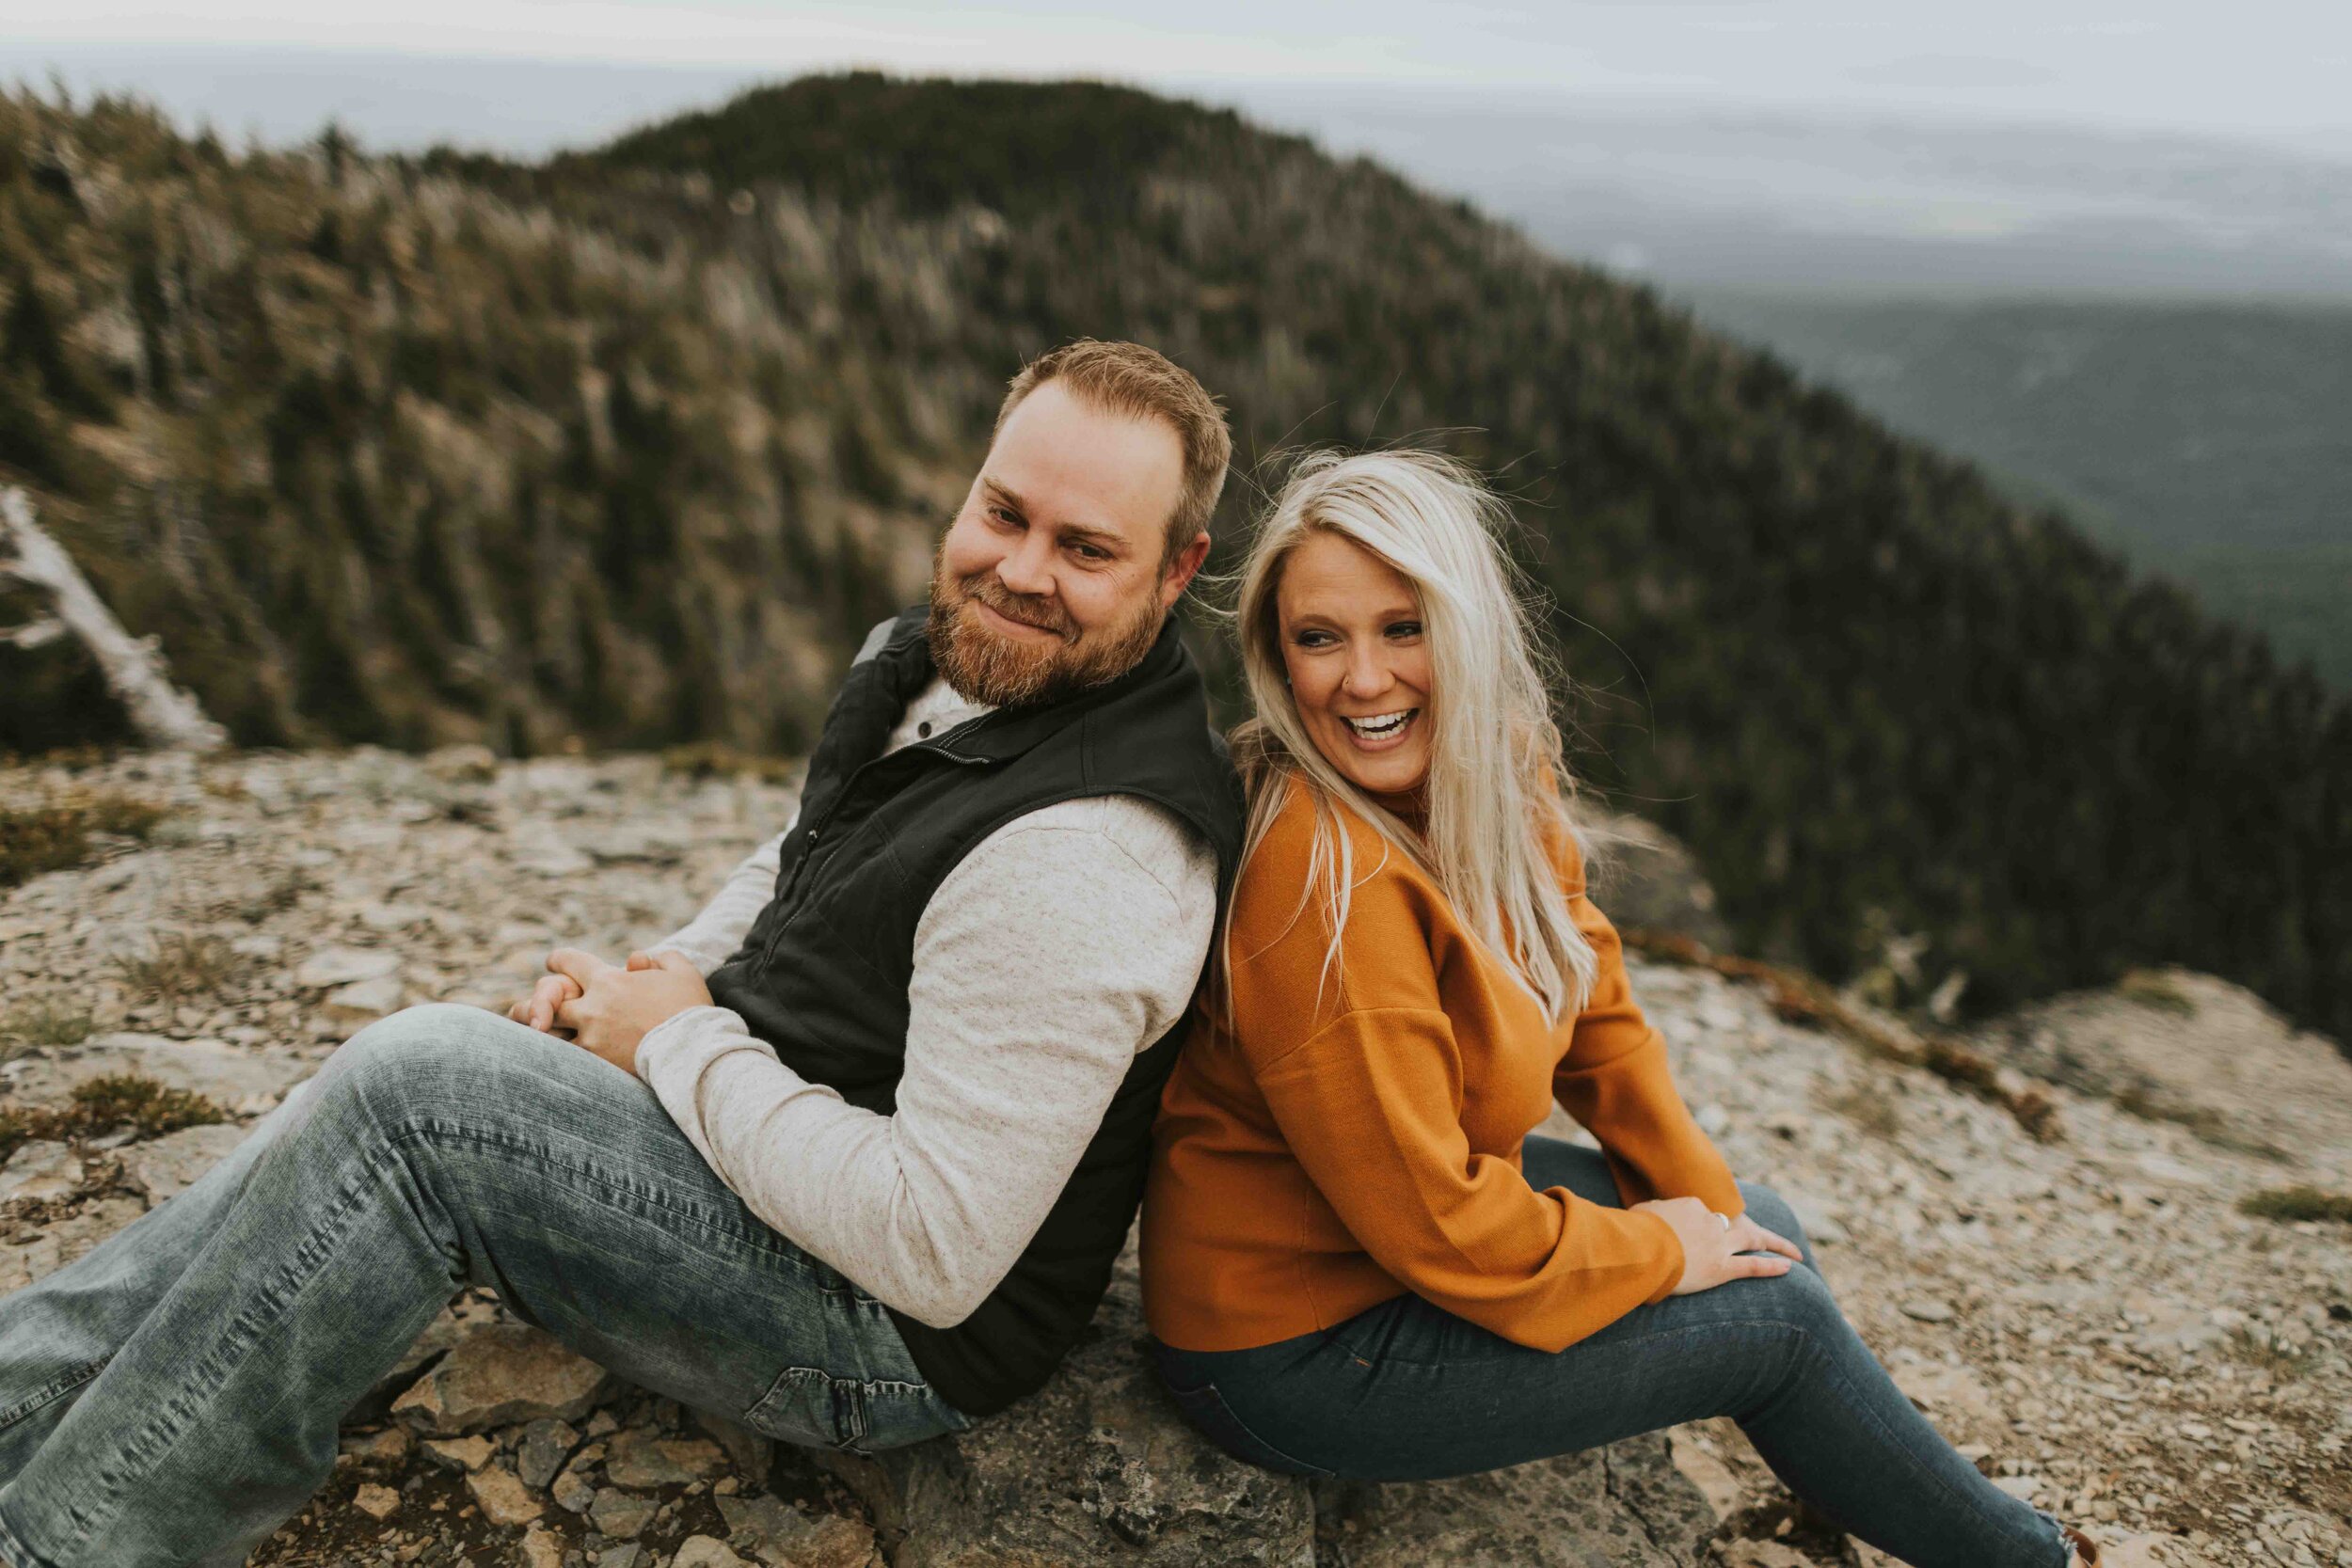 lookout-mountain-mt-hood-cozy-engagement-brittany-kevin-ilumina-photography-7037.jpg